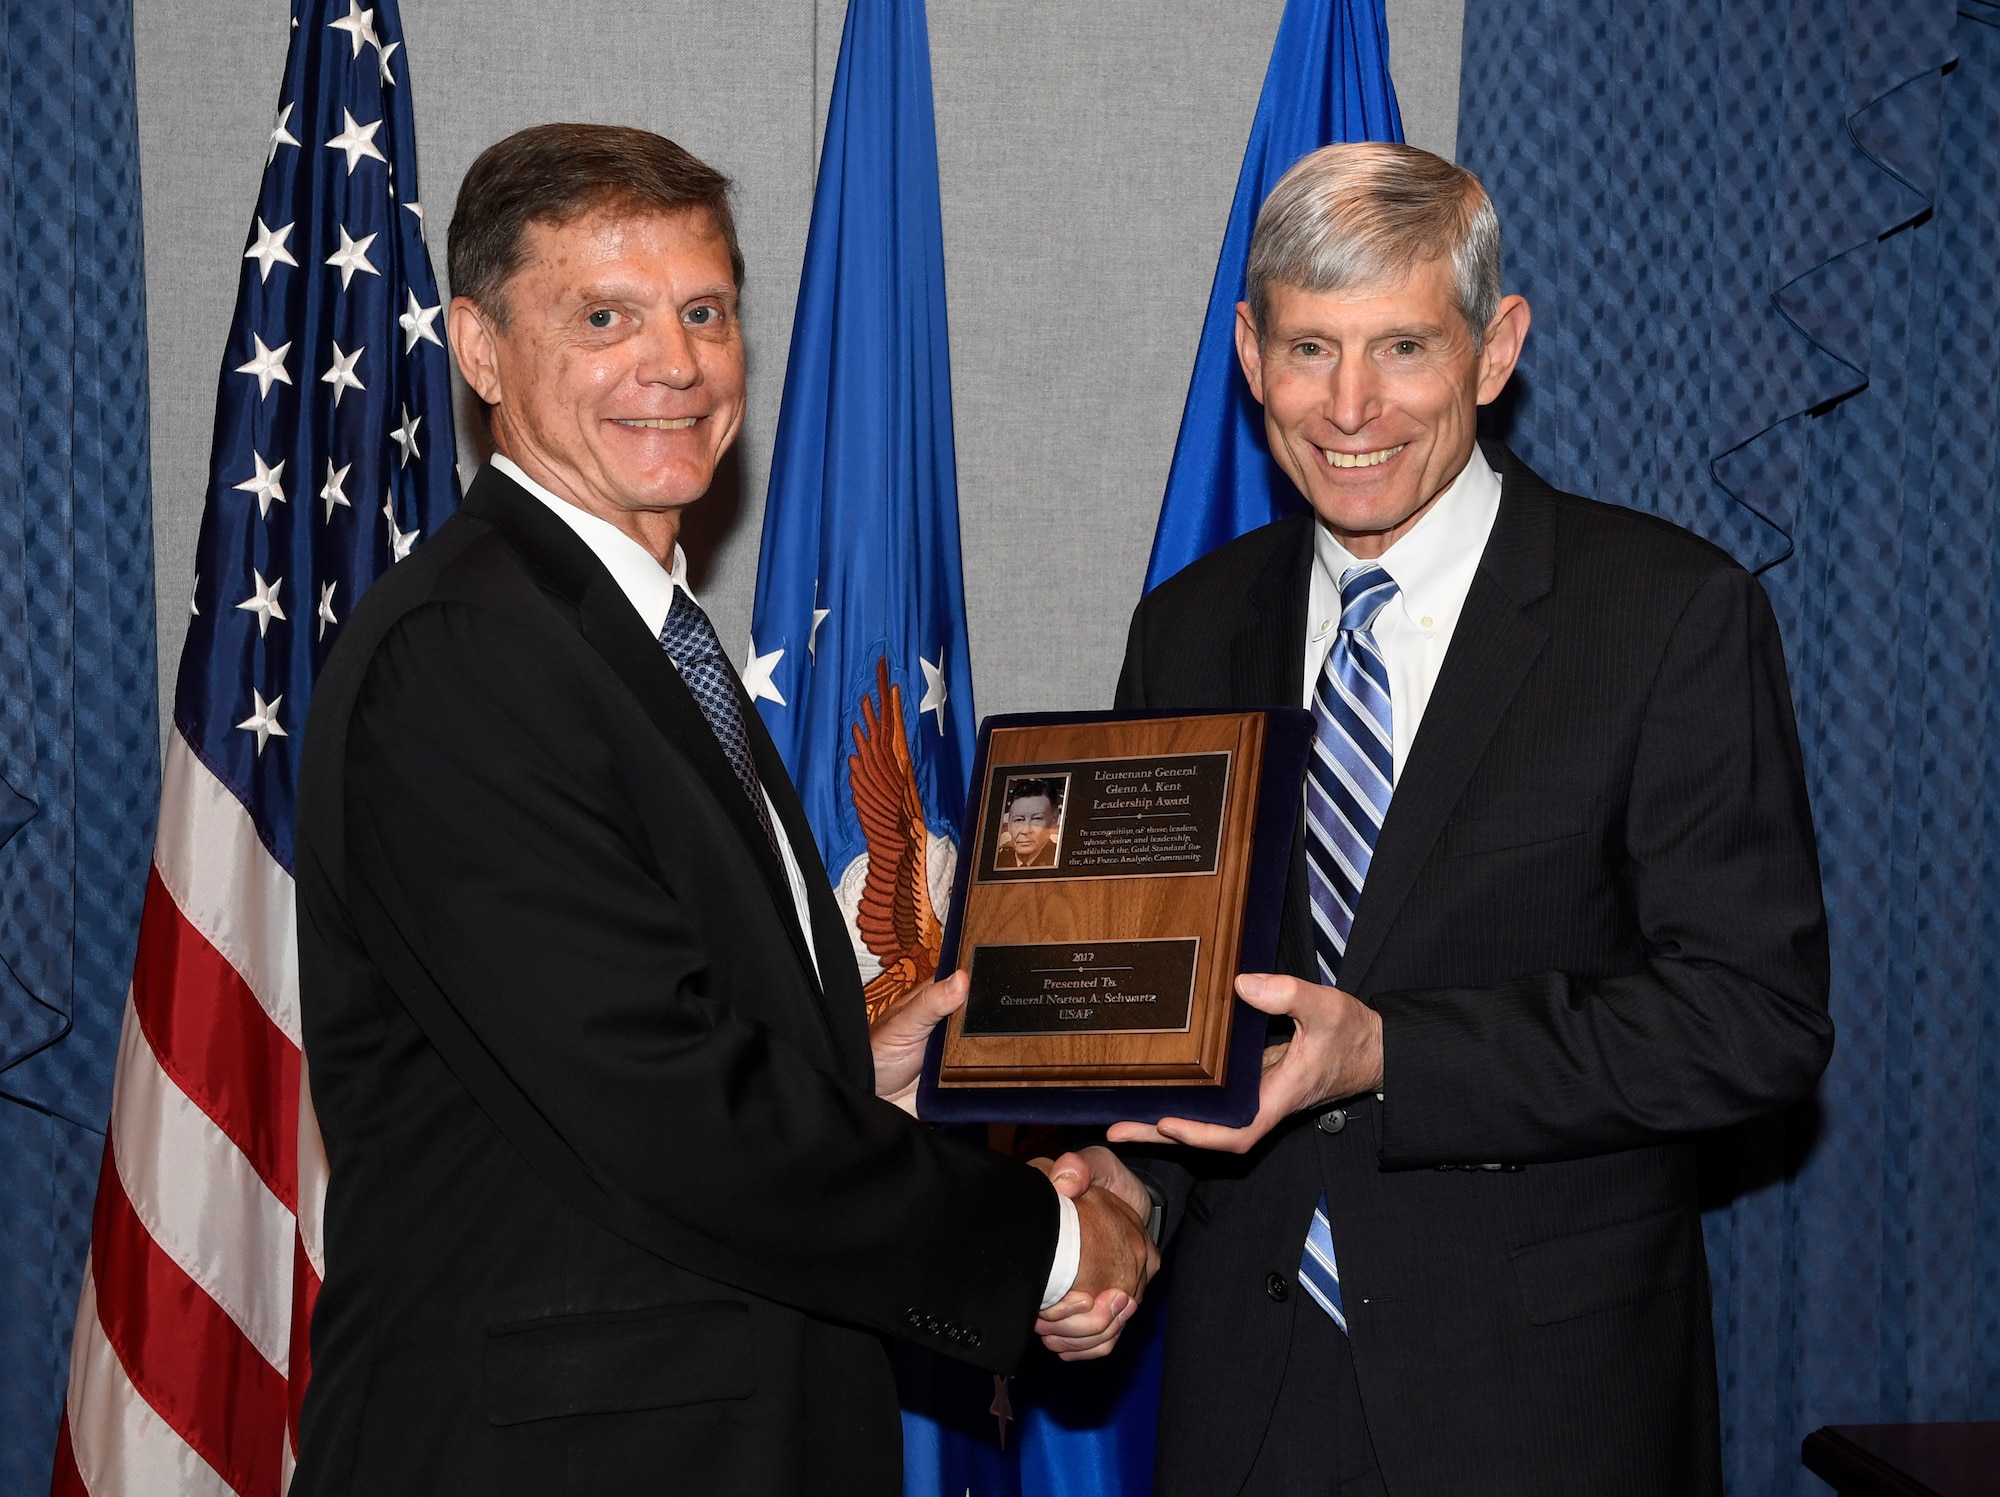 Former Chief of Staff of the Air Force General Norton Schwartz is presented the Lt. Gen. Glenn A. Kent Leadership Award by Kevin Williams, director of Air Force Studies, Analysis and Assessments during a ceremony in the Pentagon, Washington, DC, July 13, 2018. Schwartz served as CSAF from 2008 to 2012.